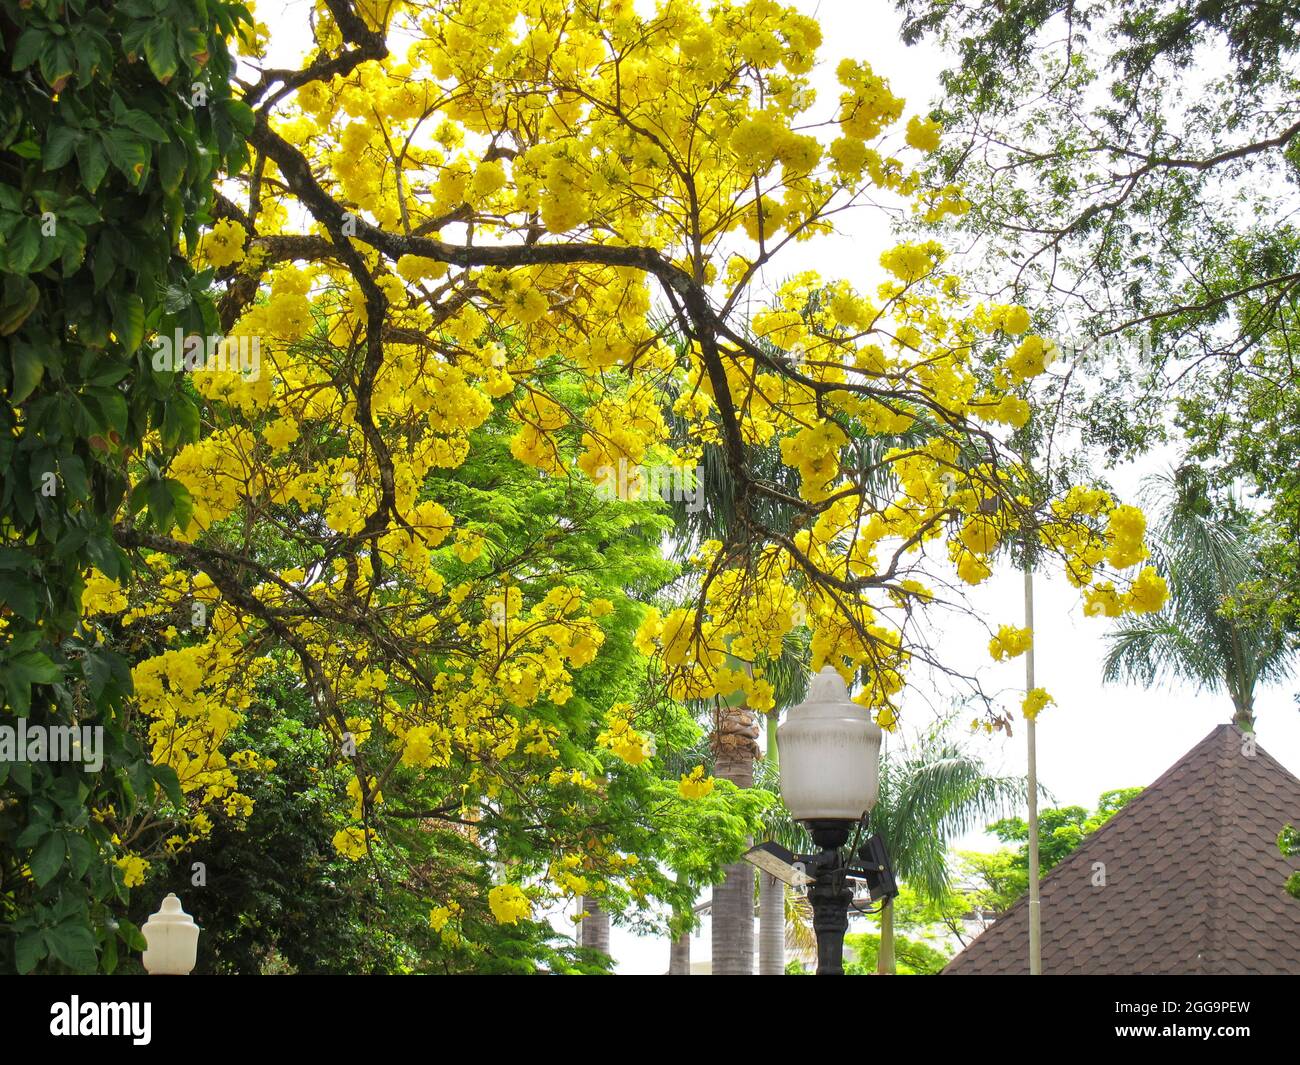 yellow ipe tree integrated into the city environment Stock Photo